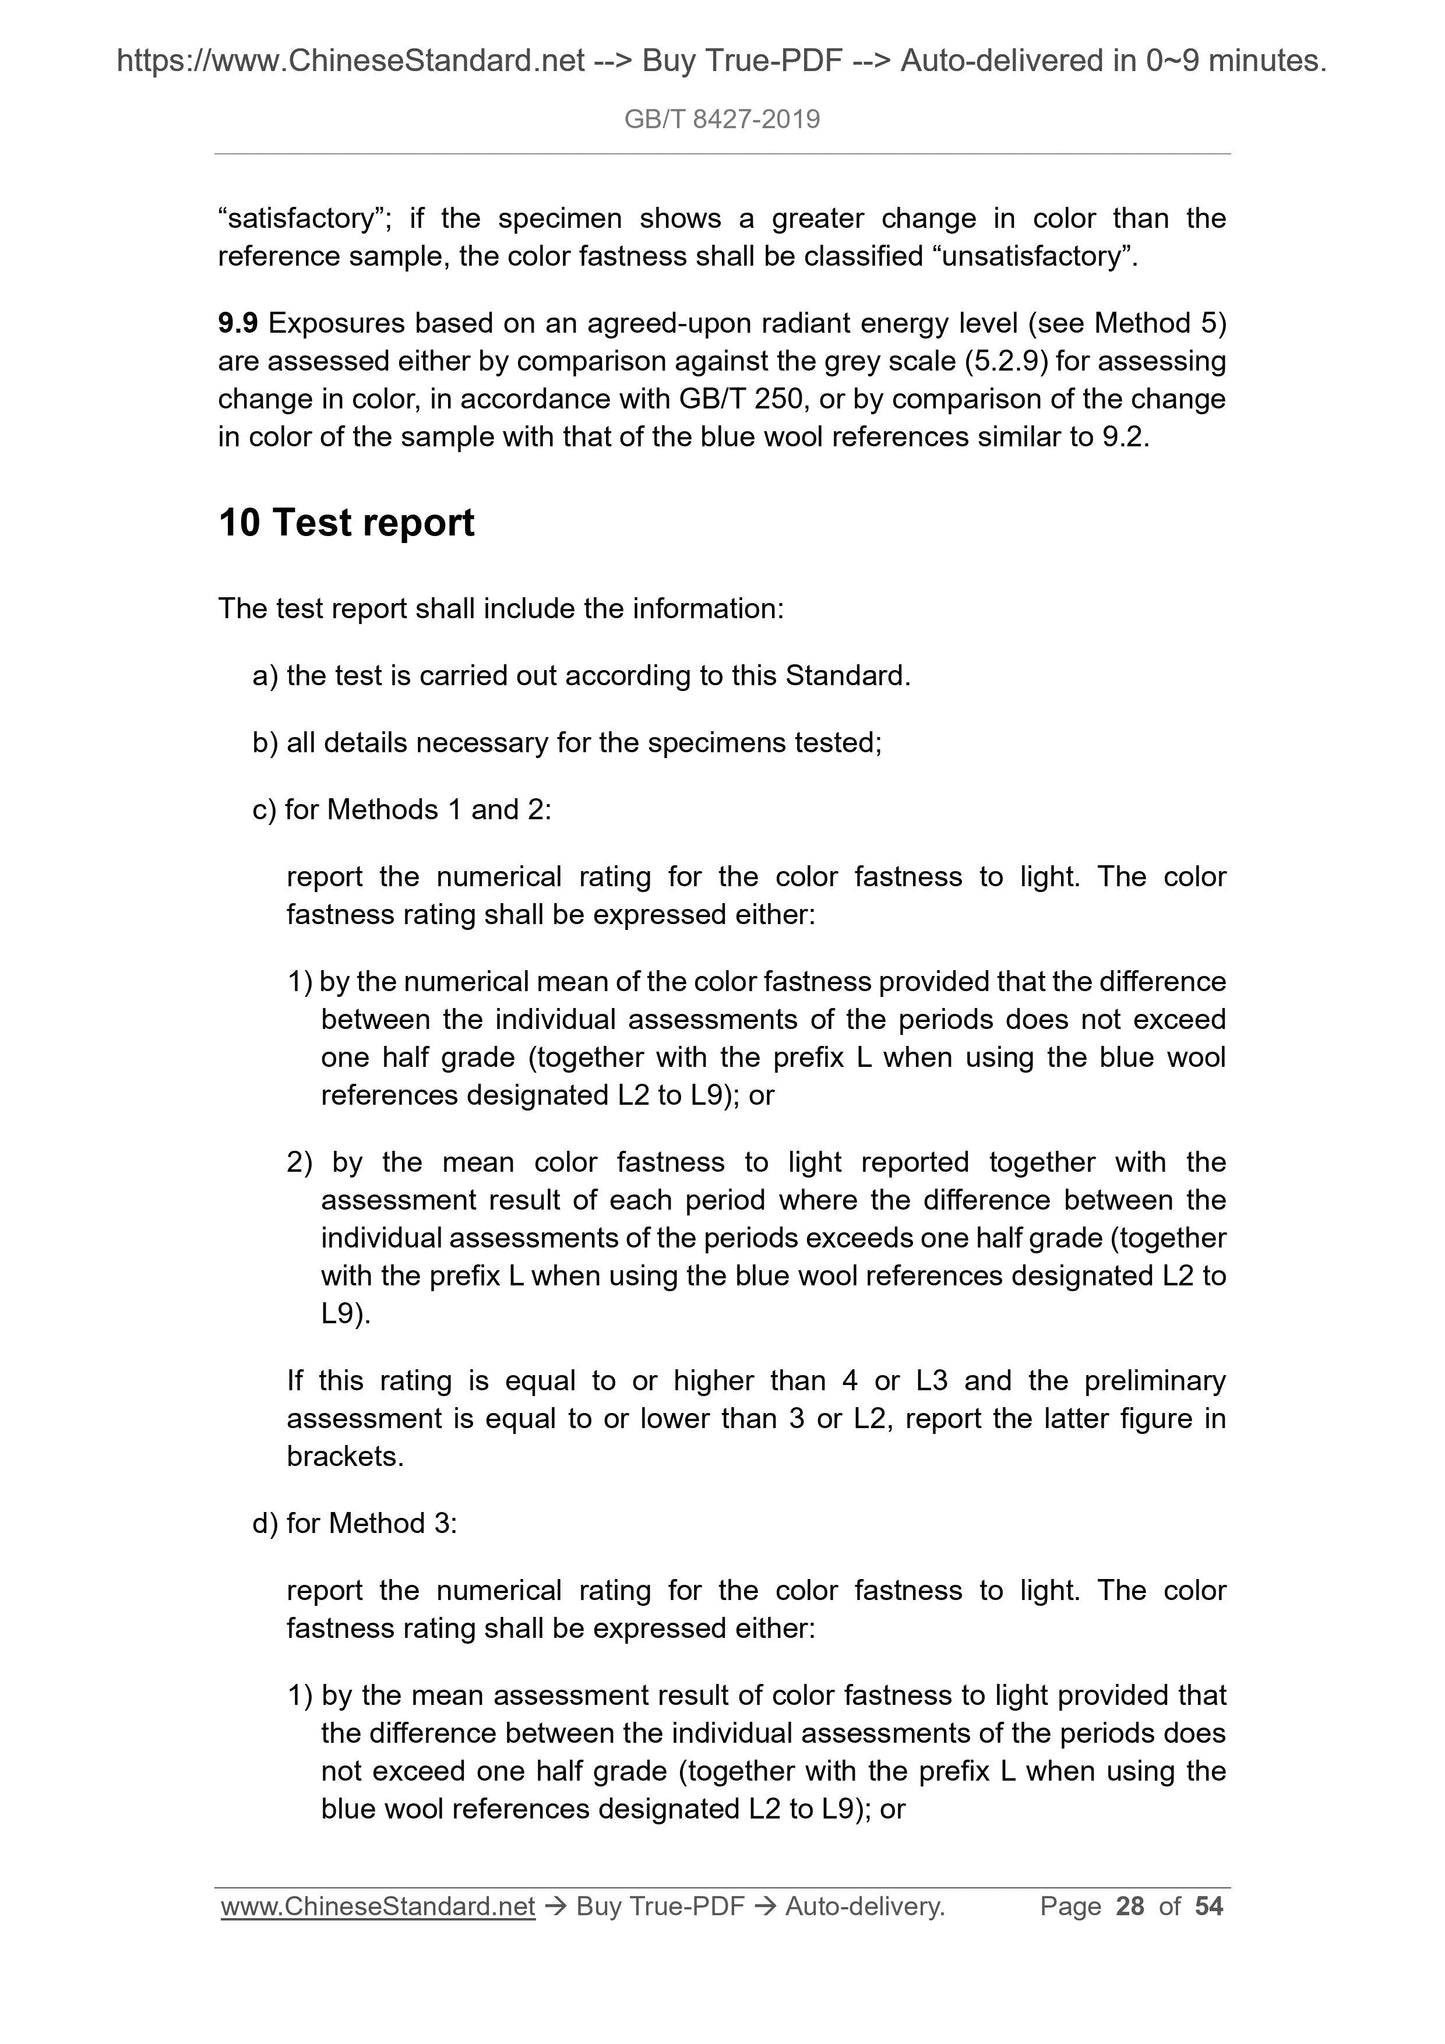 GB/T 8427-2019 Page 10